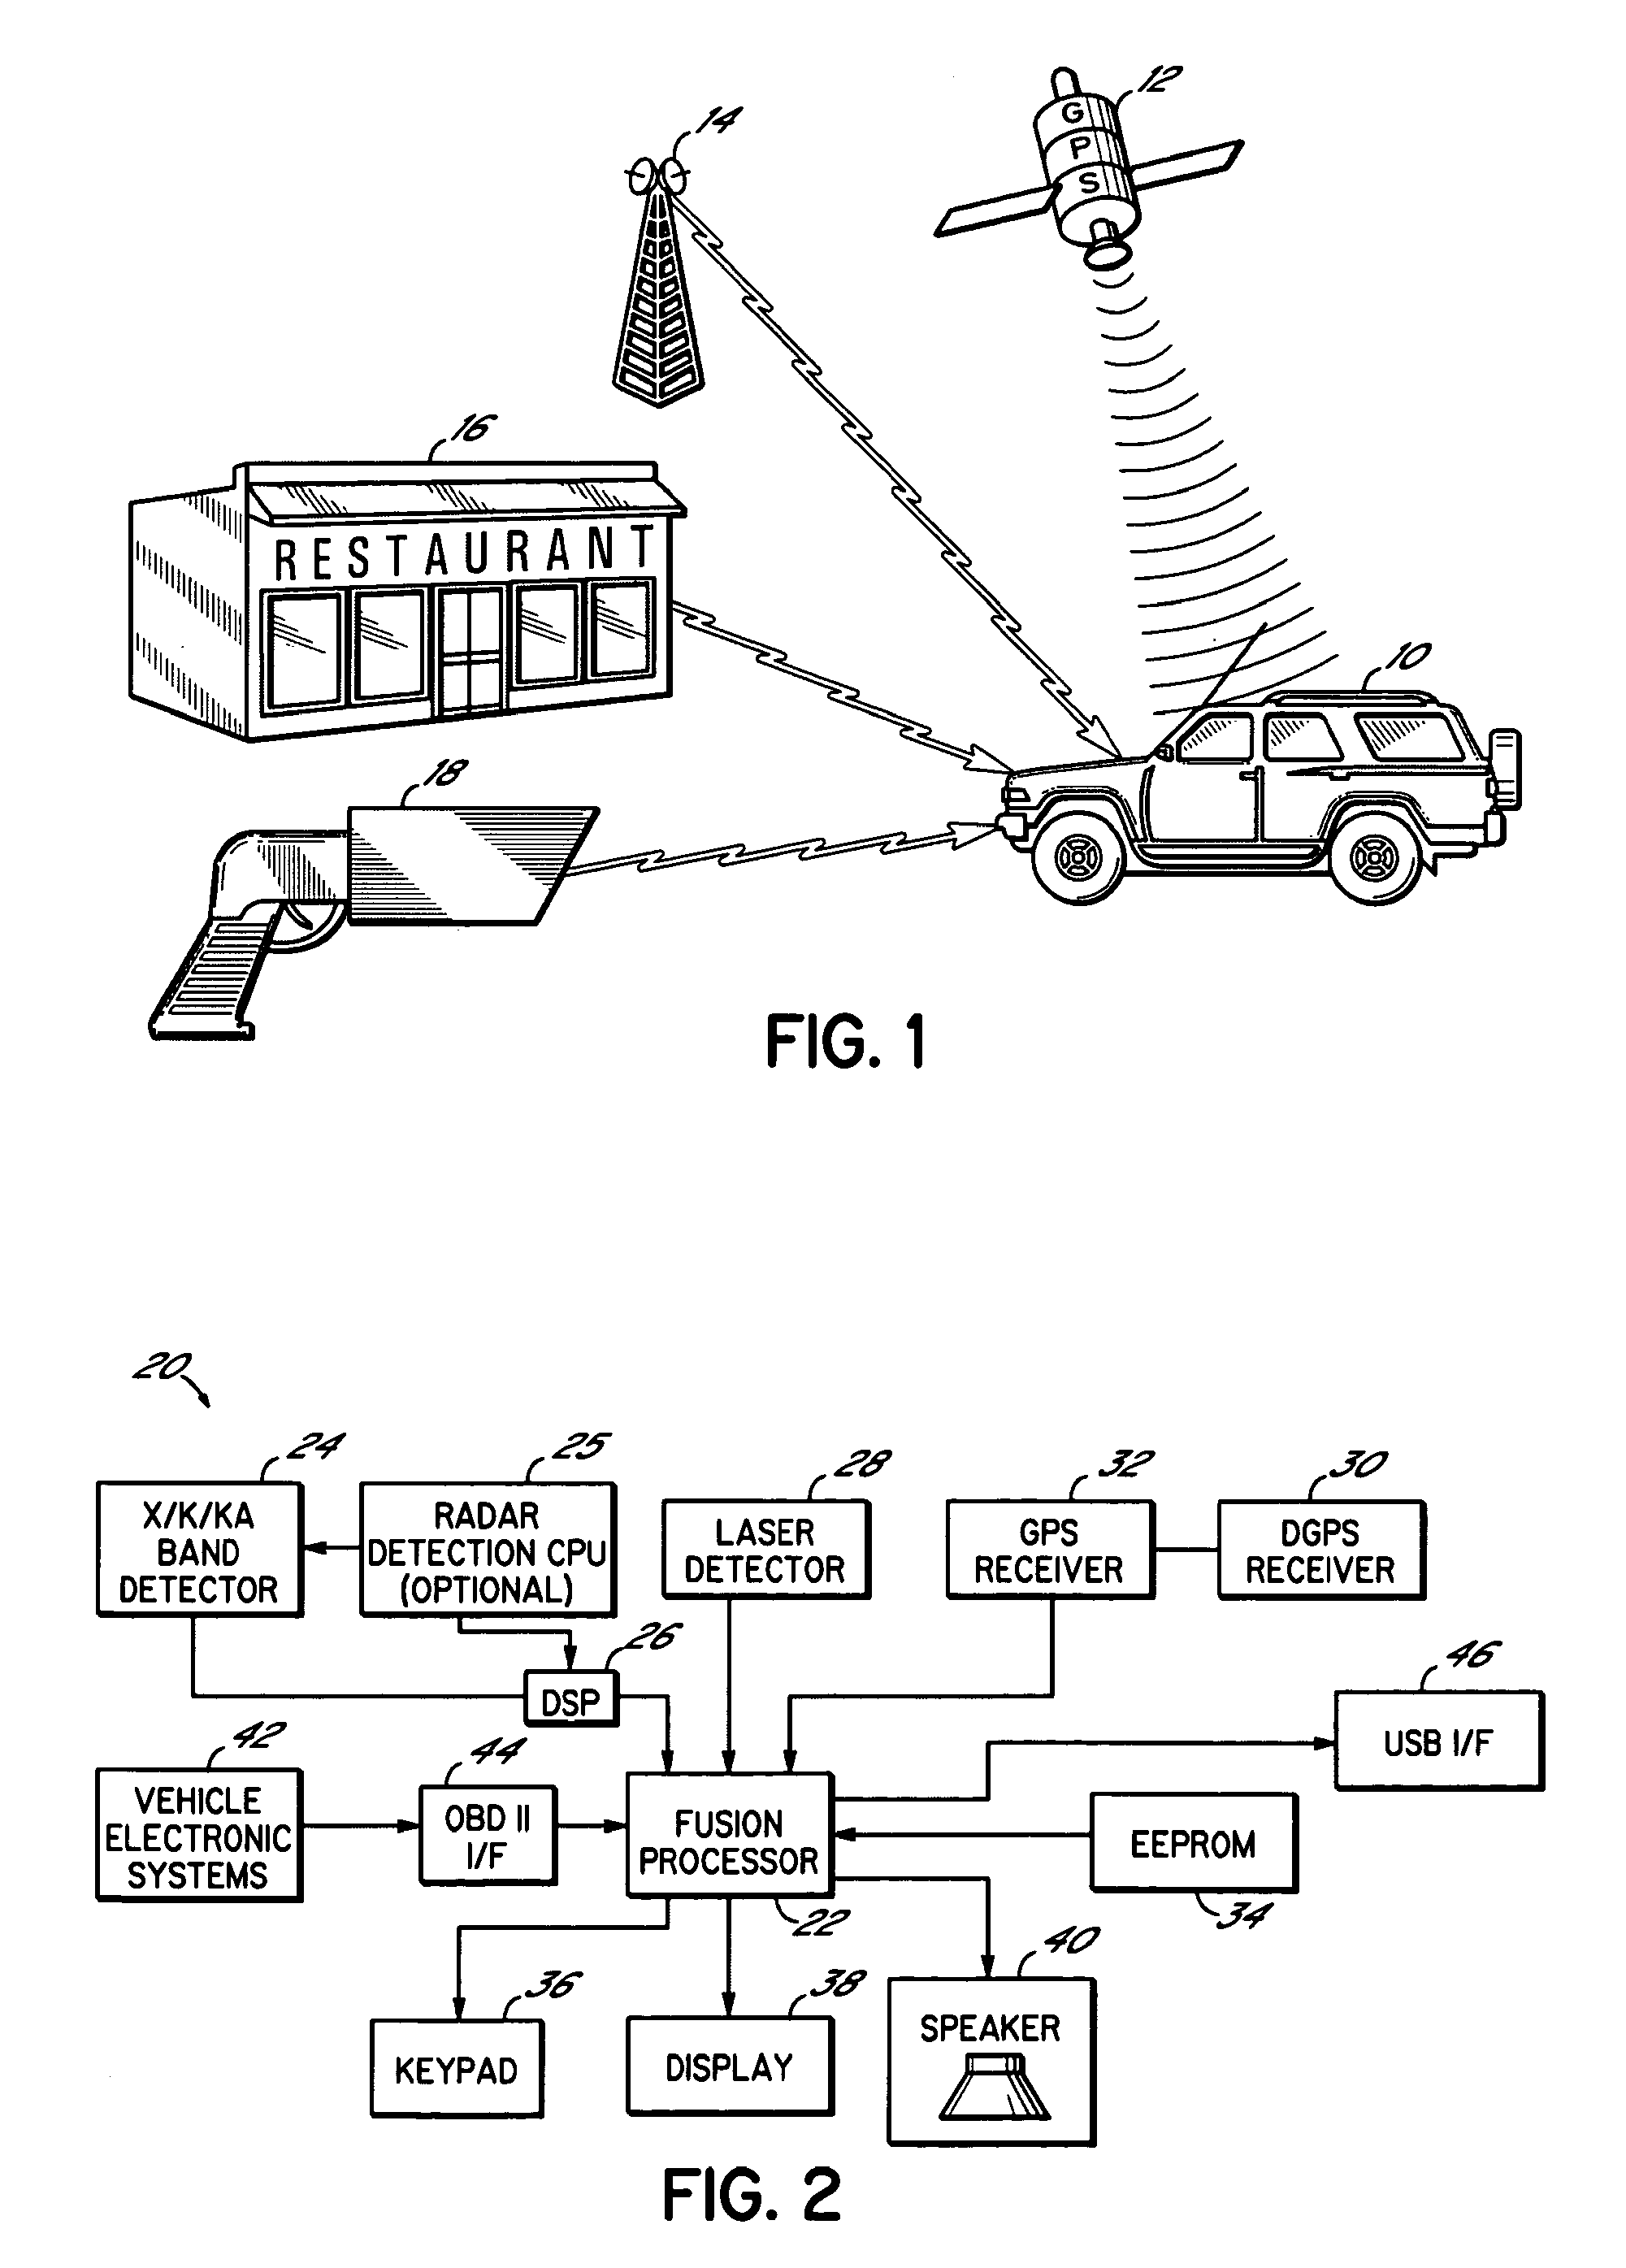 Radar detector with position and velocity sensitive functions